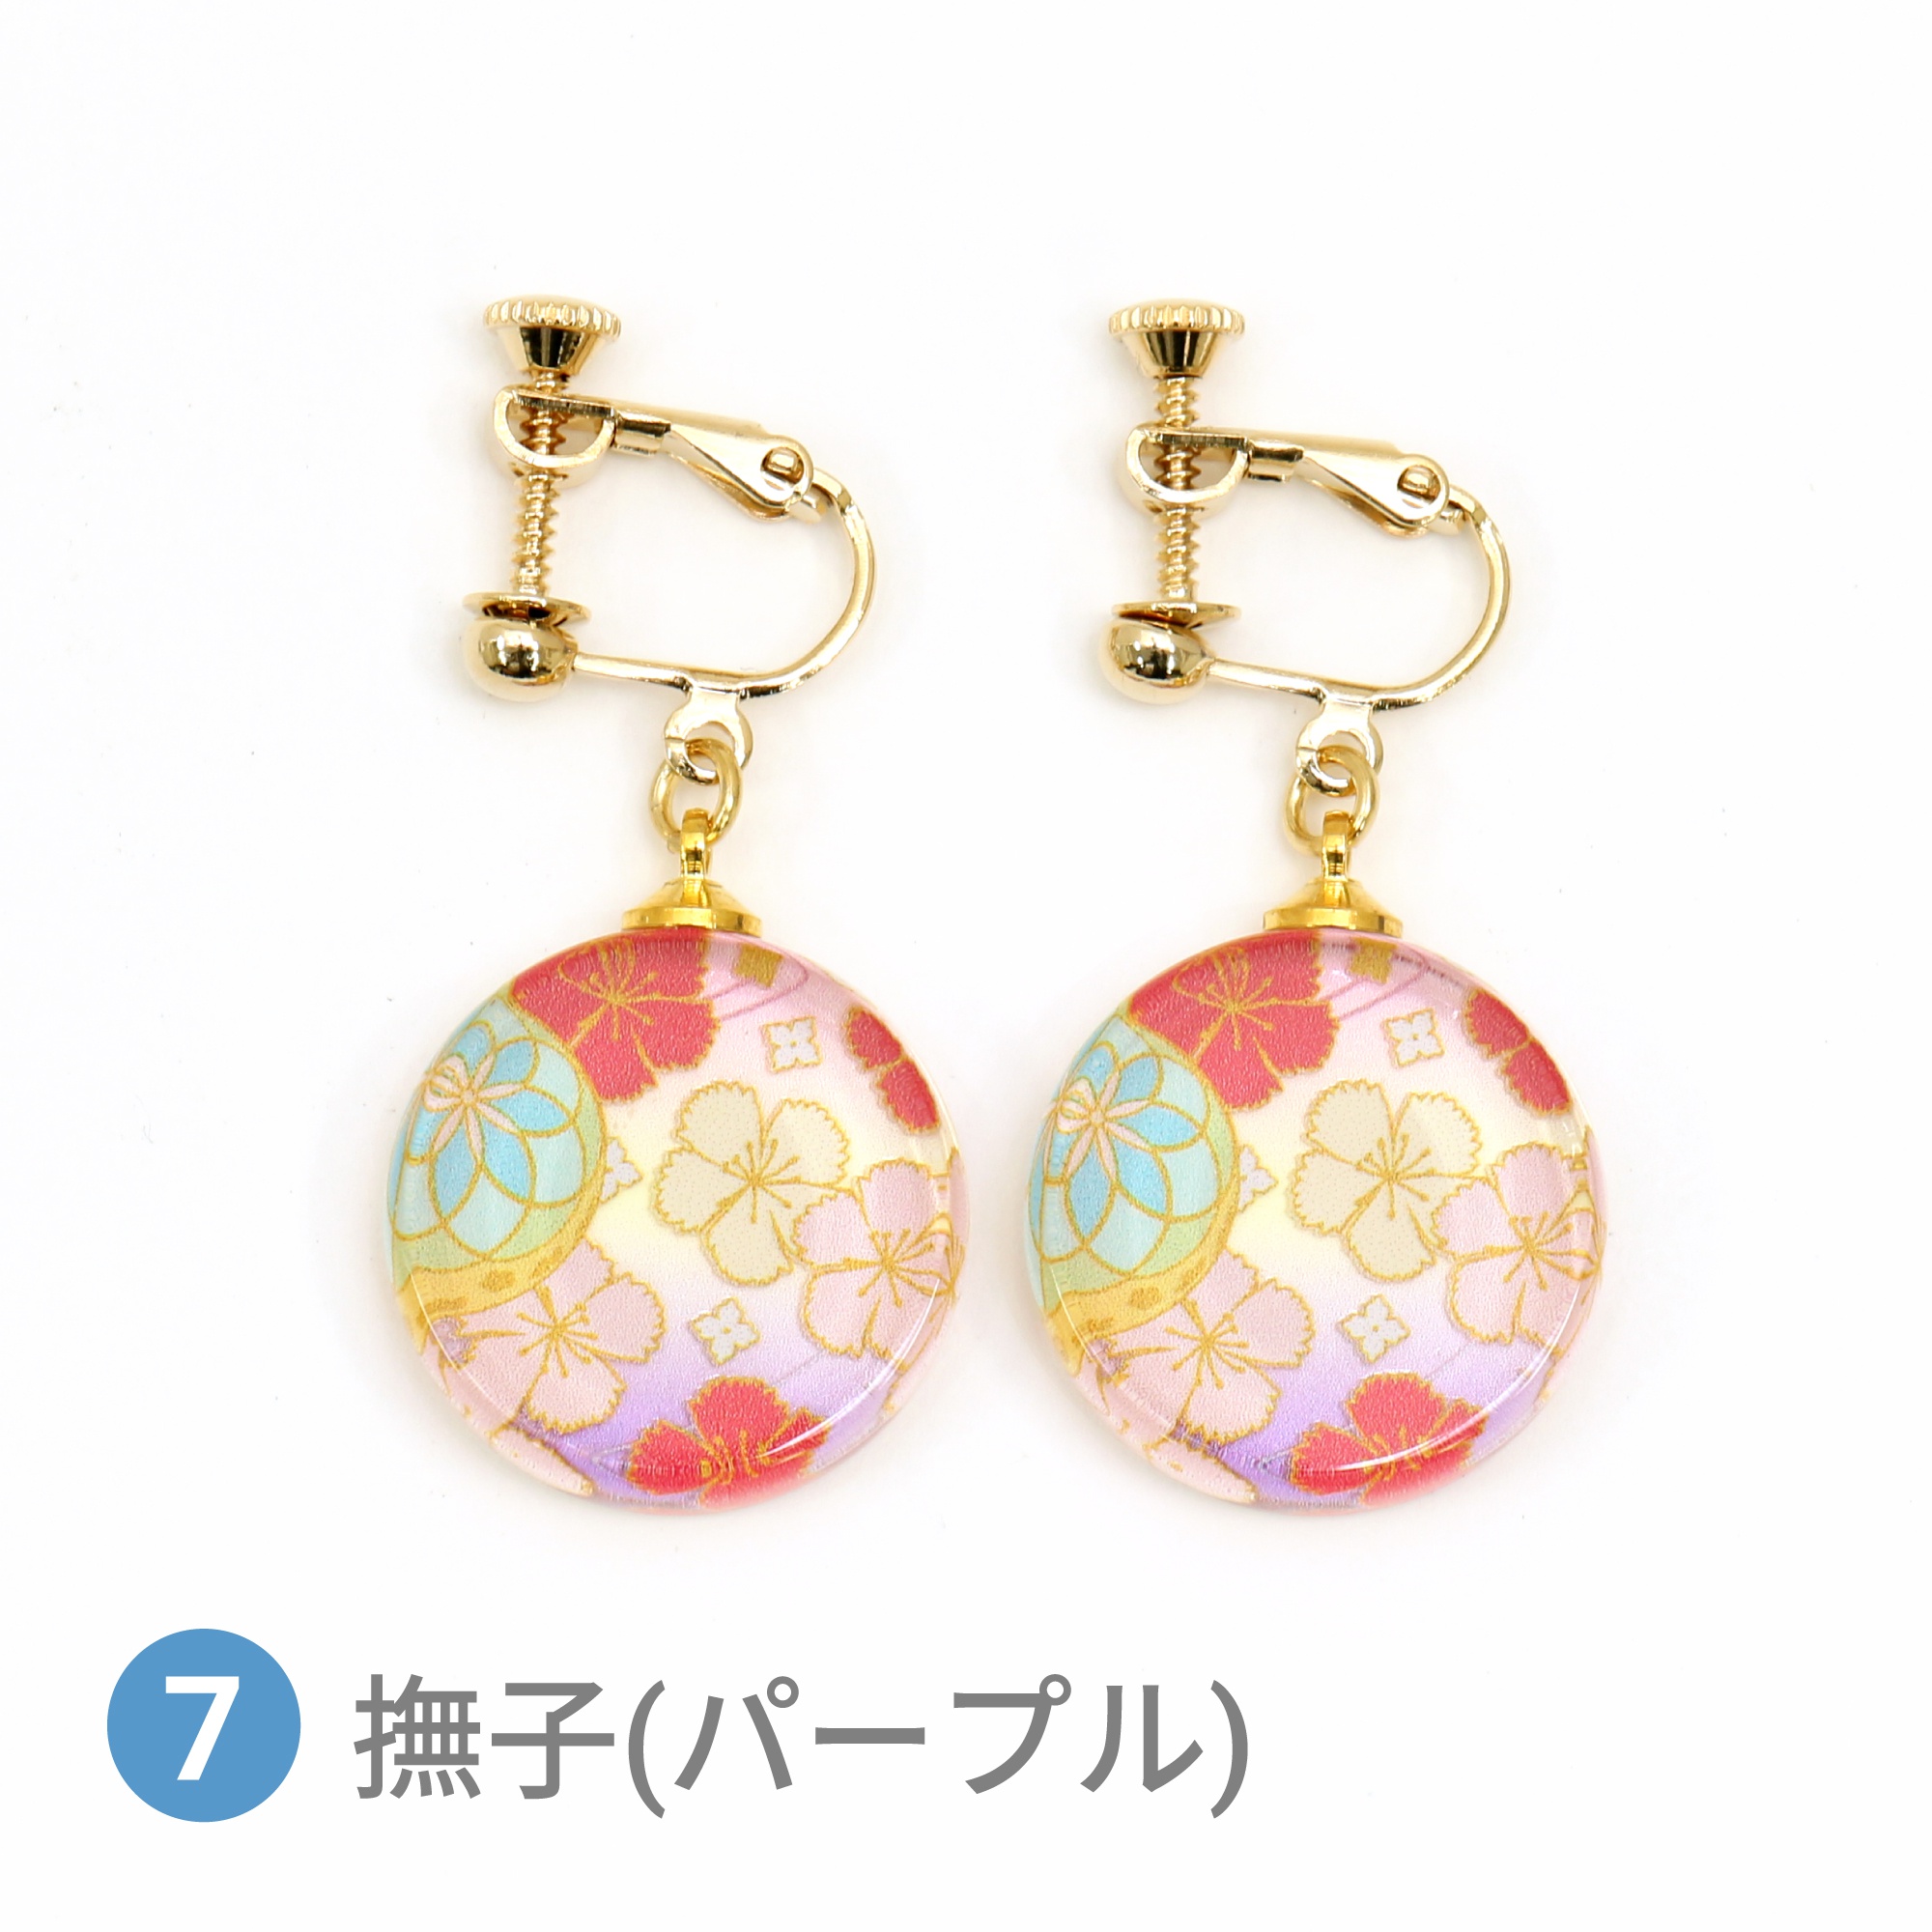 Glass accessories Earring WABANA Dianthus flower pueple round shape